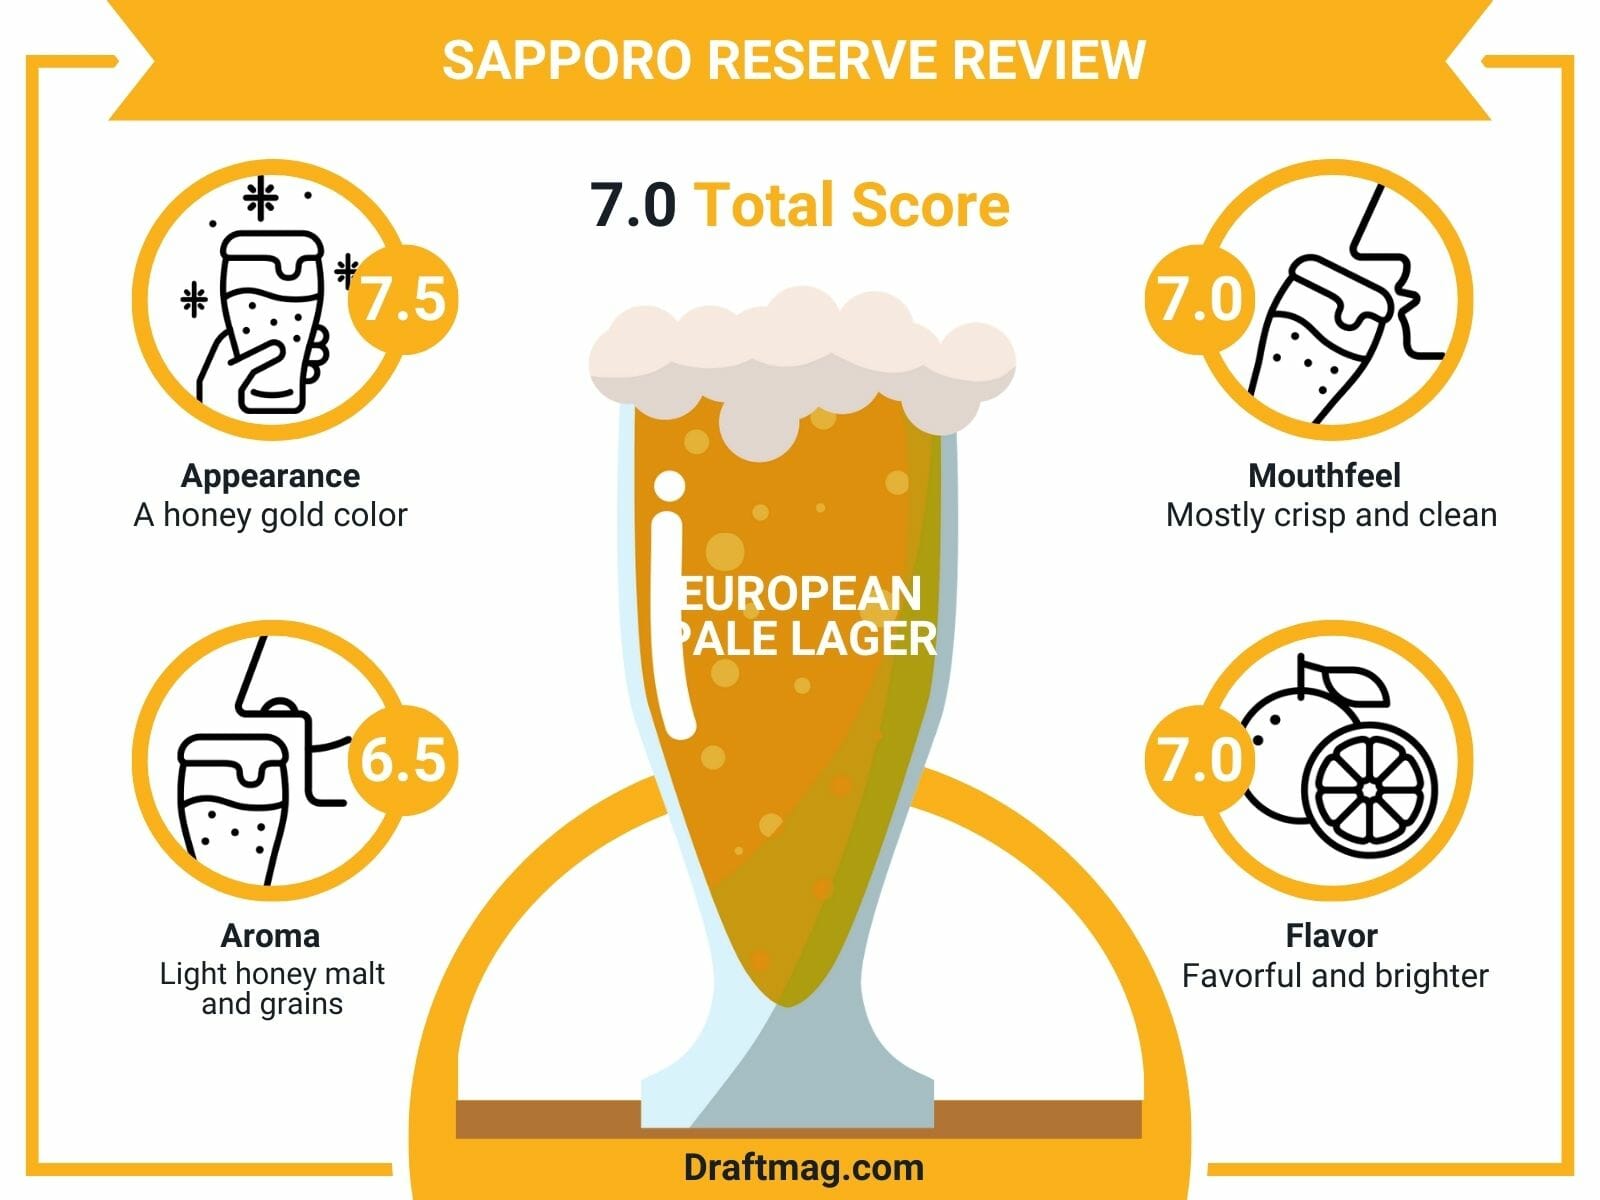 Sapporo Reserve Review Infographic